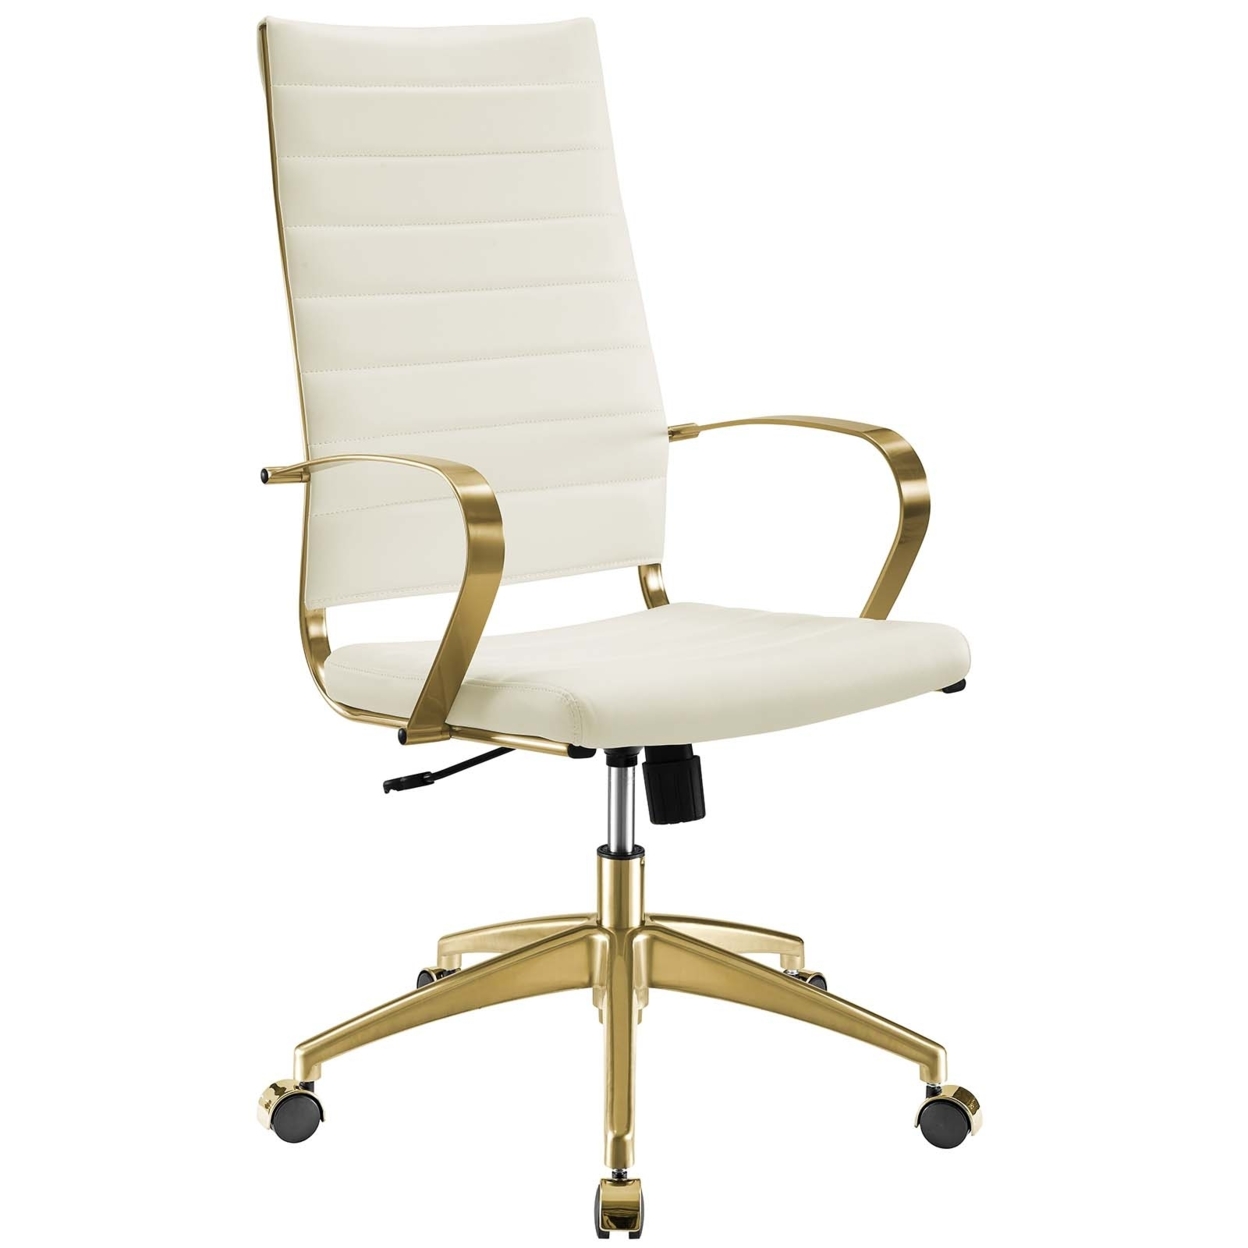 Jive Gold Stainless Steel Highback Office Chair,Gold White